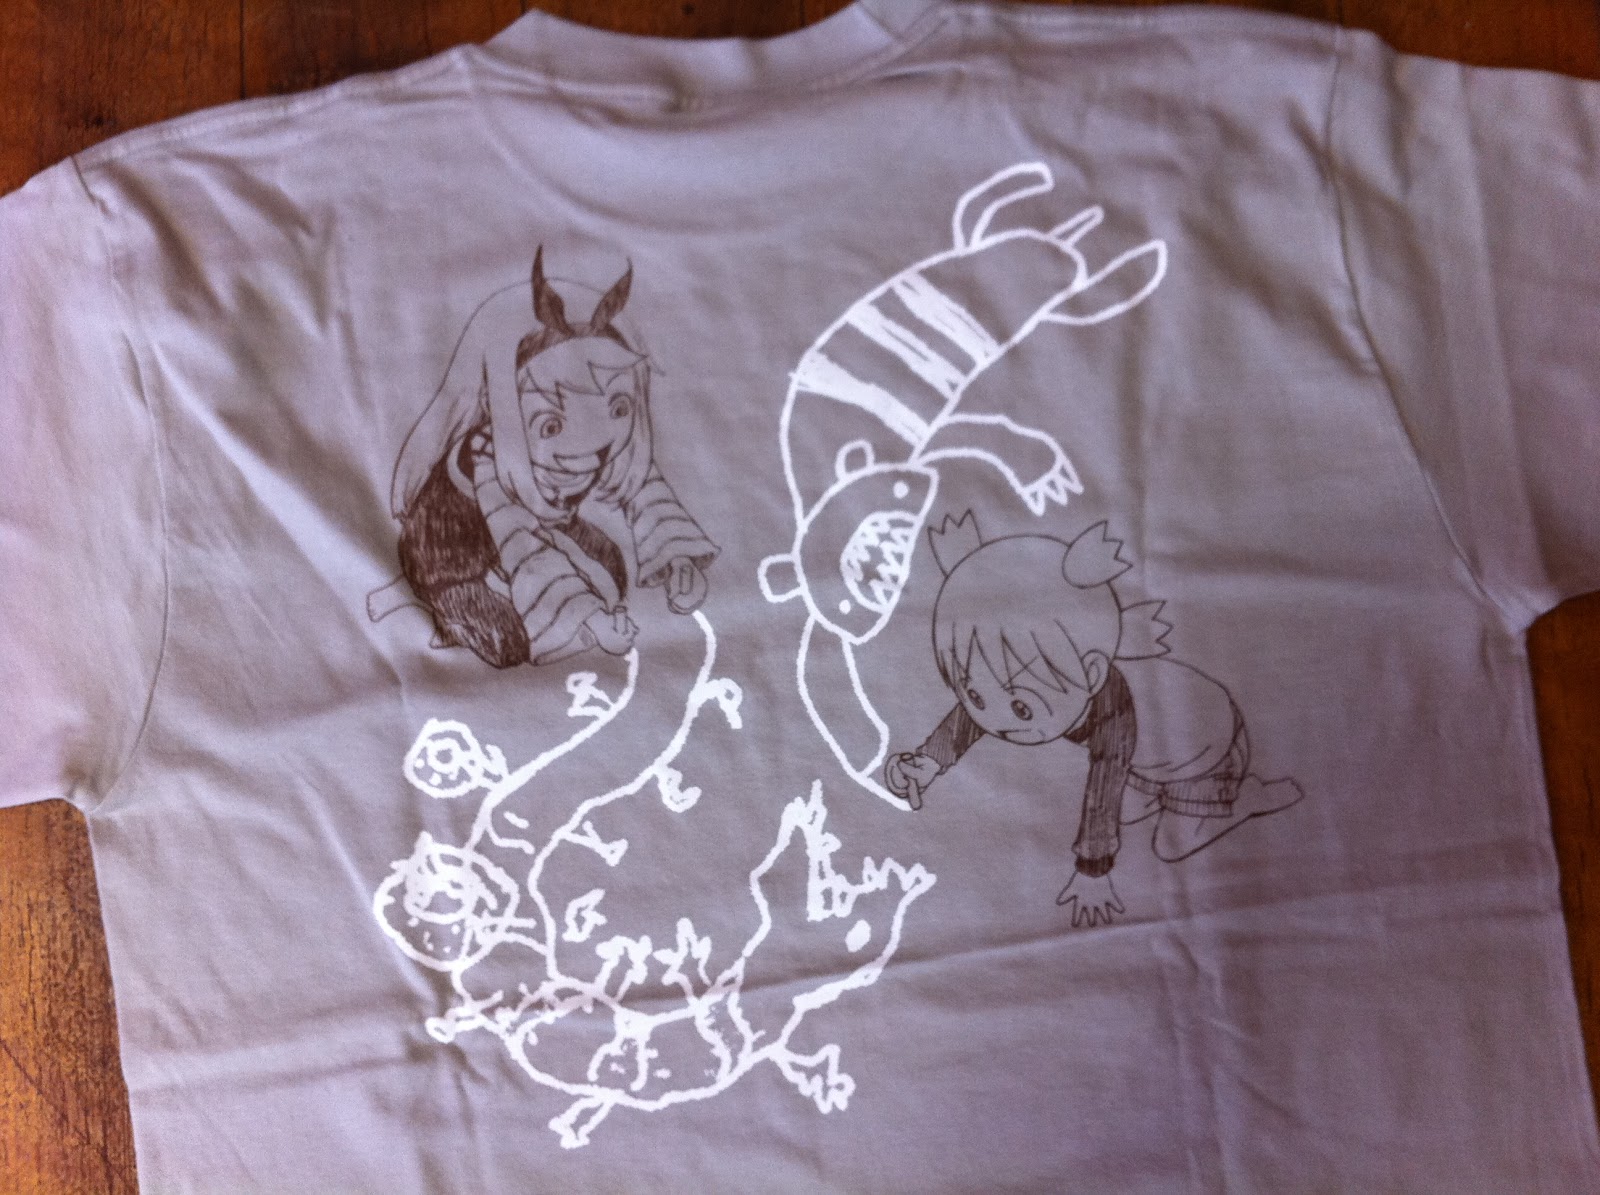 shirt from the Rondo Robe Booth, A collab between Abe Yoshitoshi ...